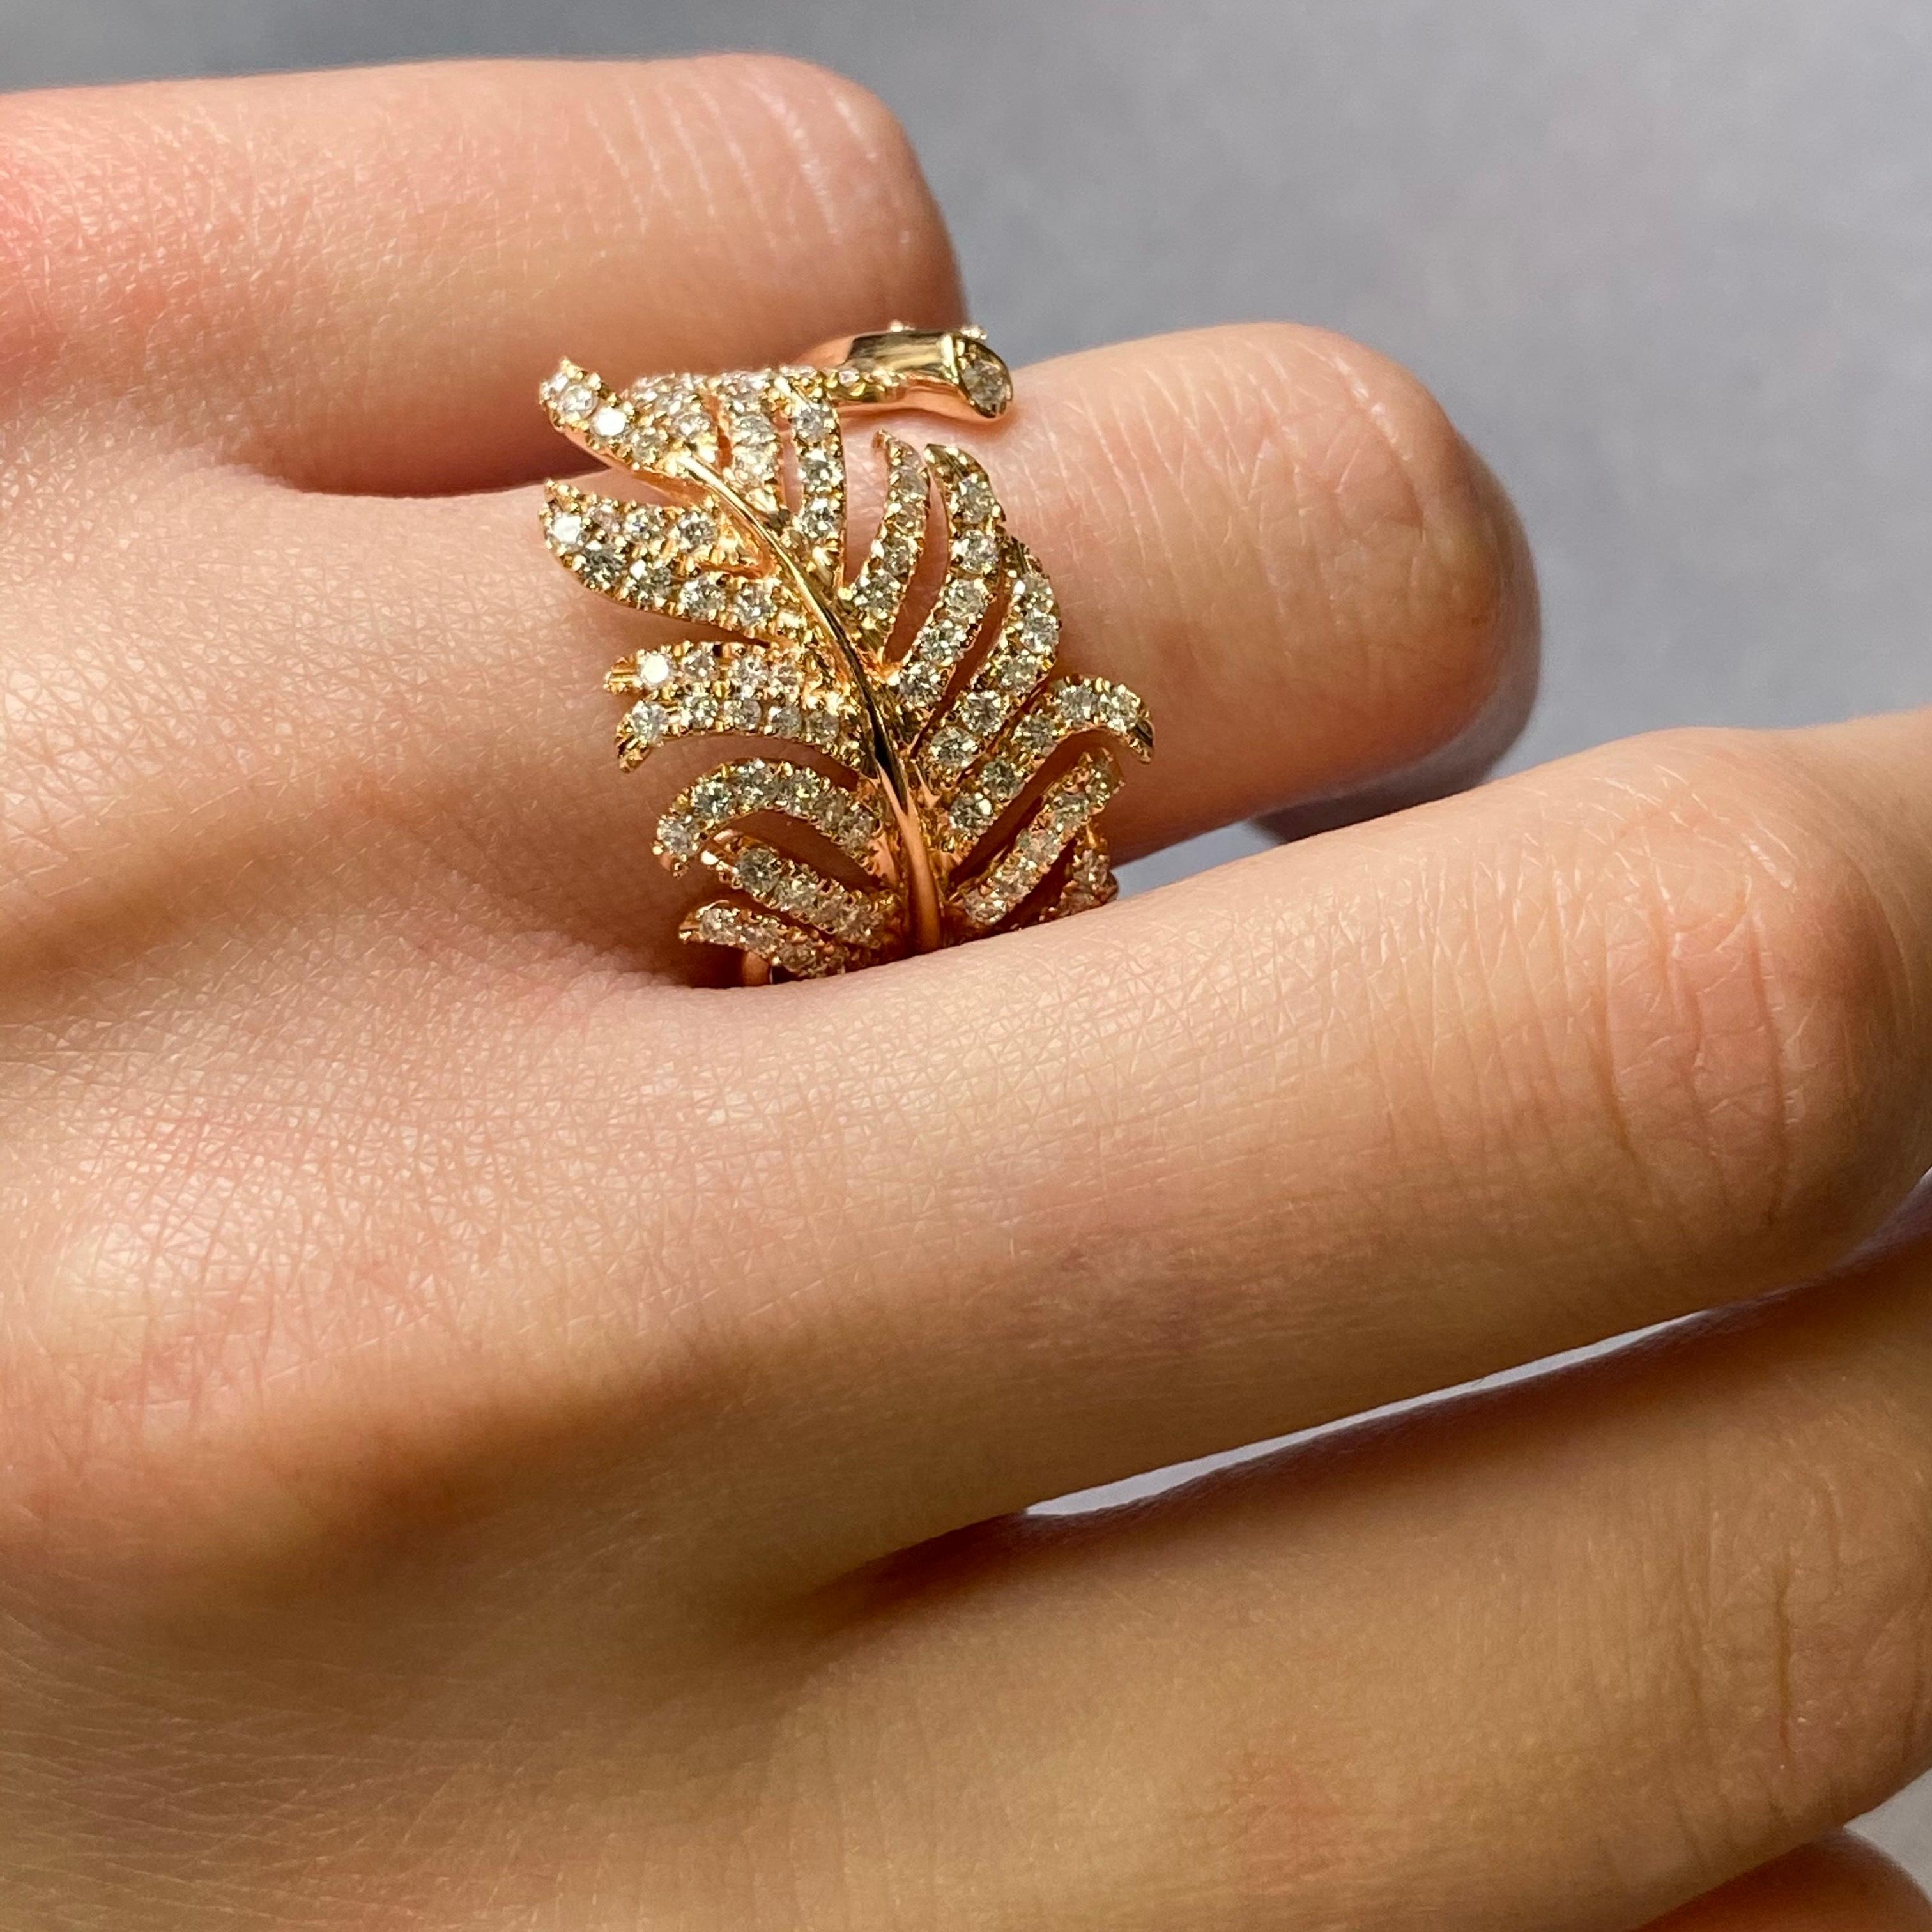 Rachel Koen Diamond Feather Statement Ring 18K Rose Gold 1.24cttw In New Condition For Sale In New York, NY